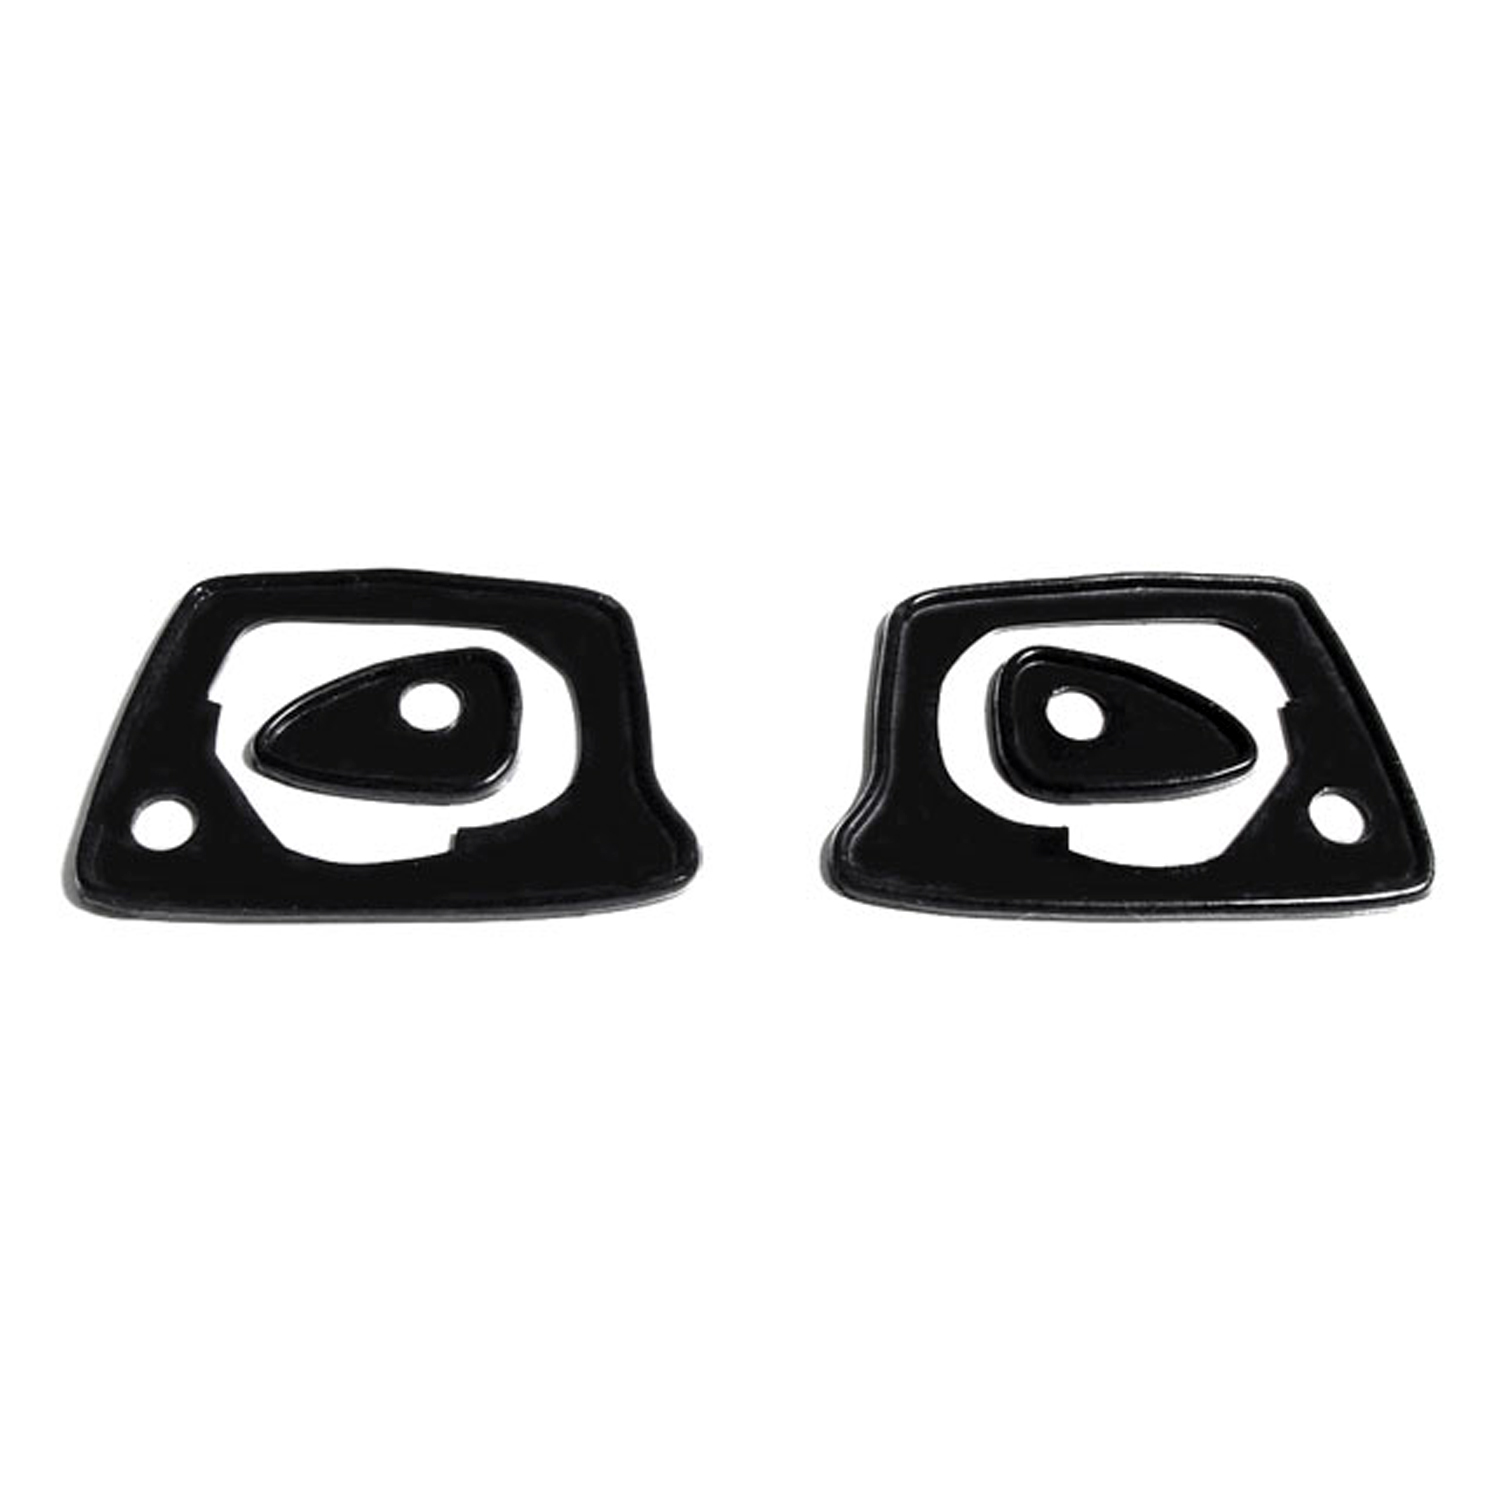 1969 Plymouth Fury I Door handle mounting pads.  2-3/8 in. L x 1-1/8 in. L-MP 959-B